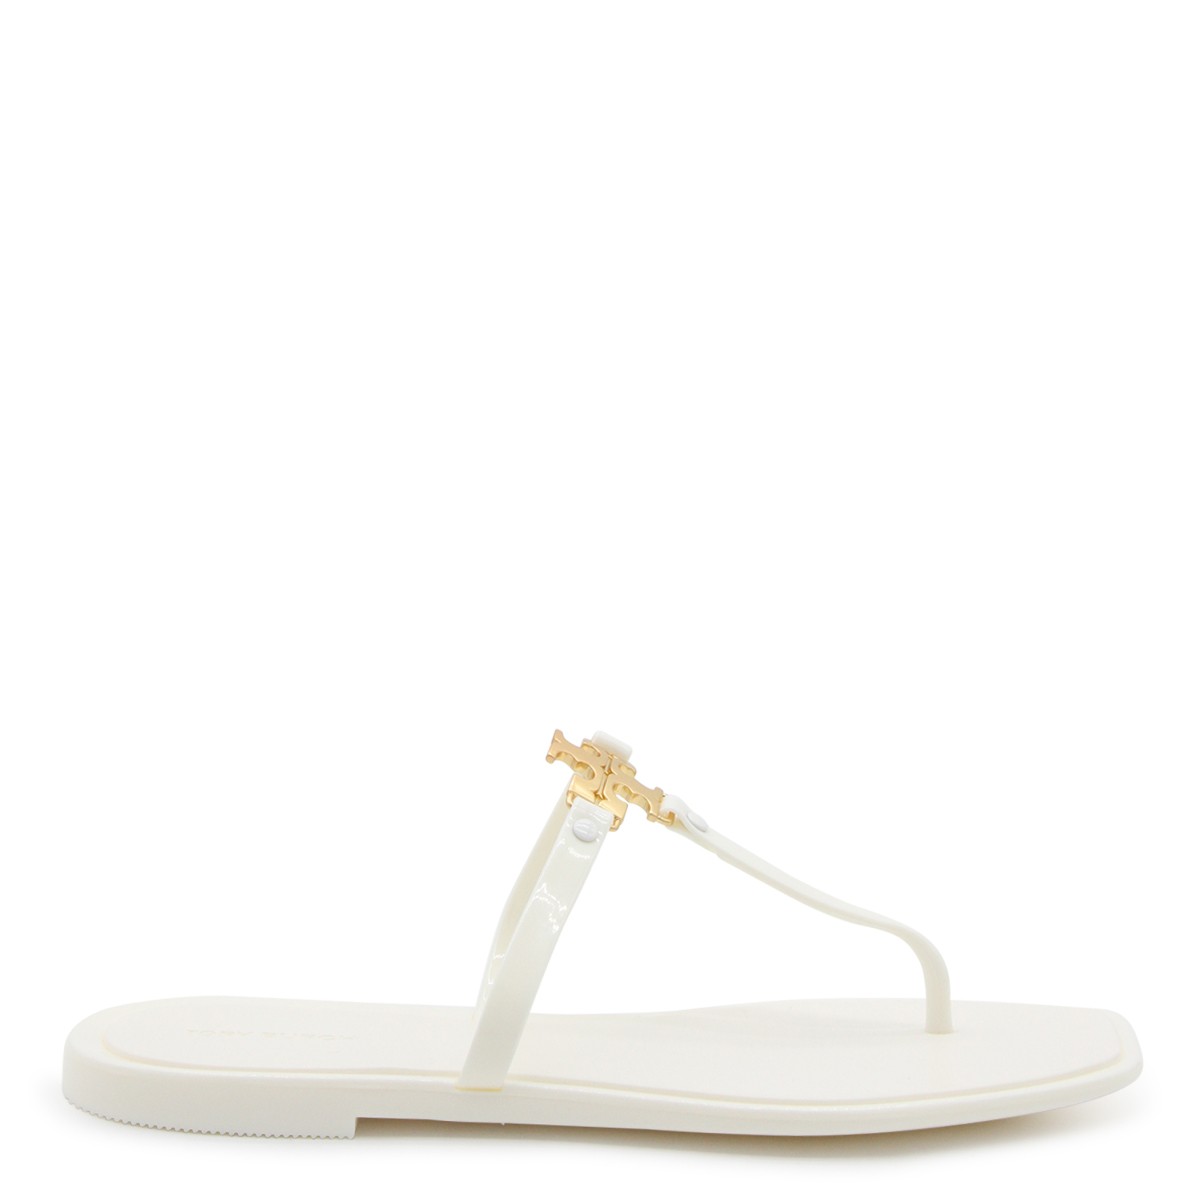 IVORY AND GOLD RUBBER ROXANNE JELLY FLATS 